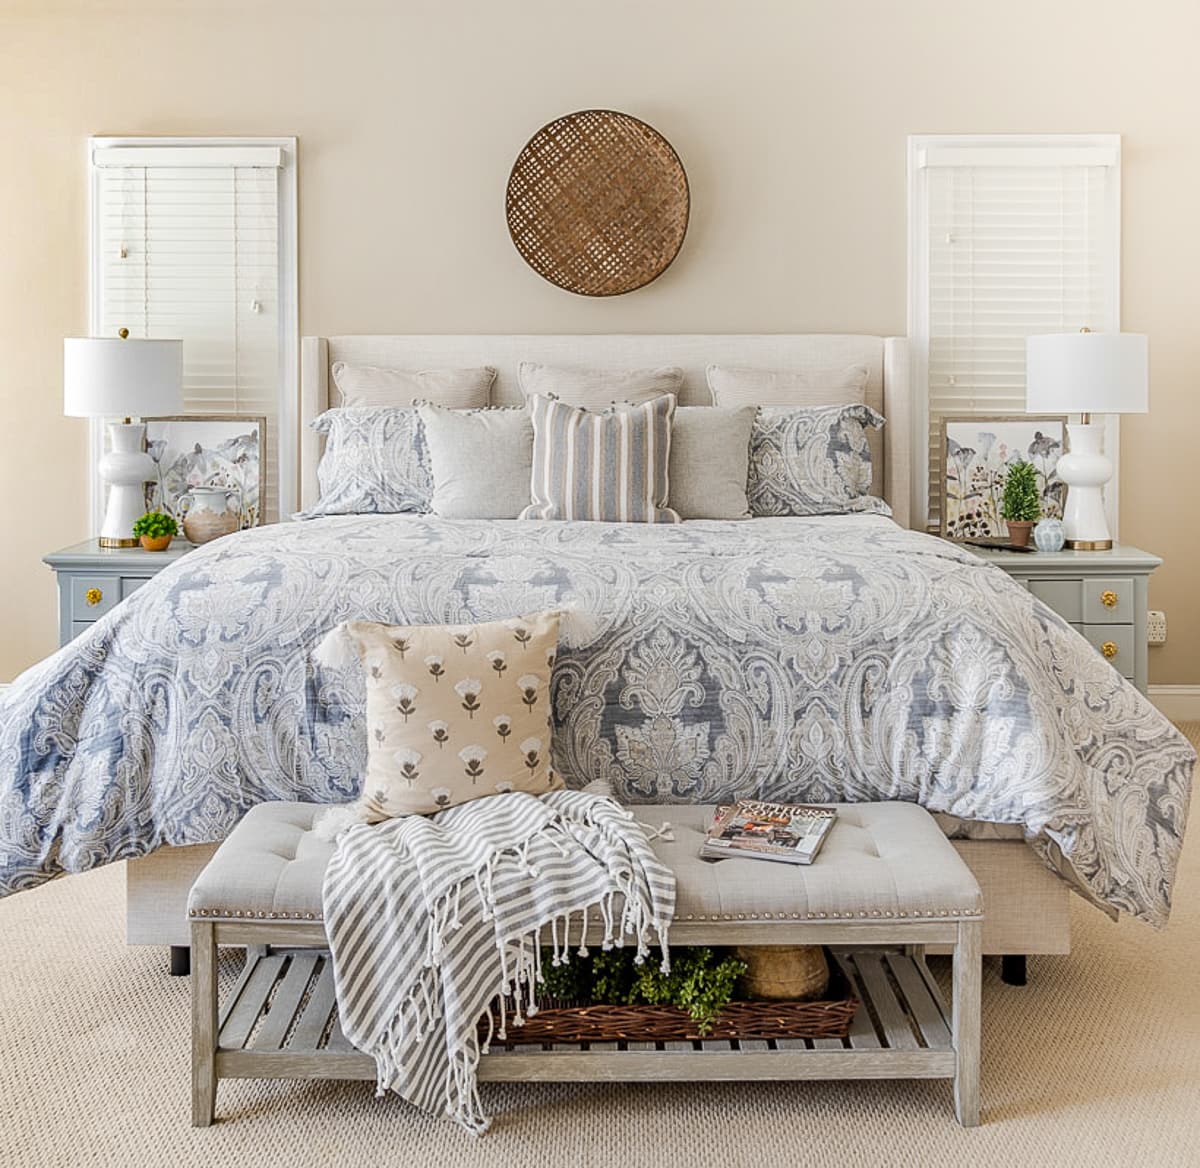 King size bed with neutral bedding flanked by gray nightstands with white lamps